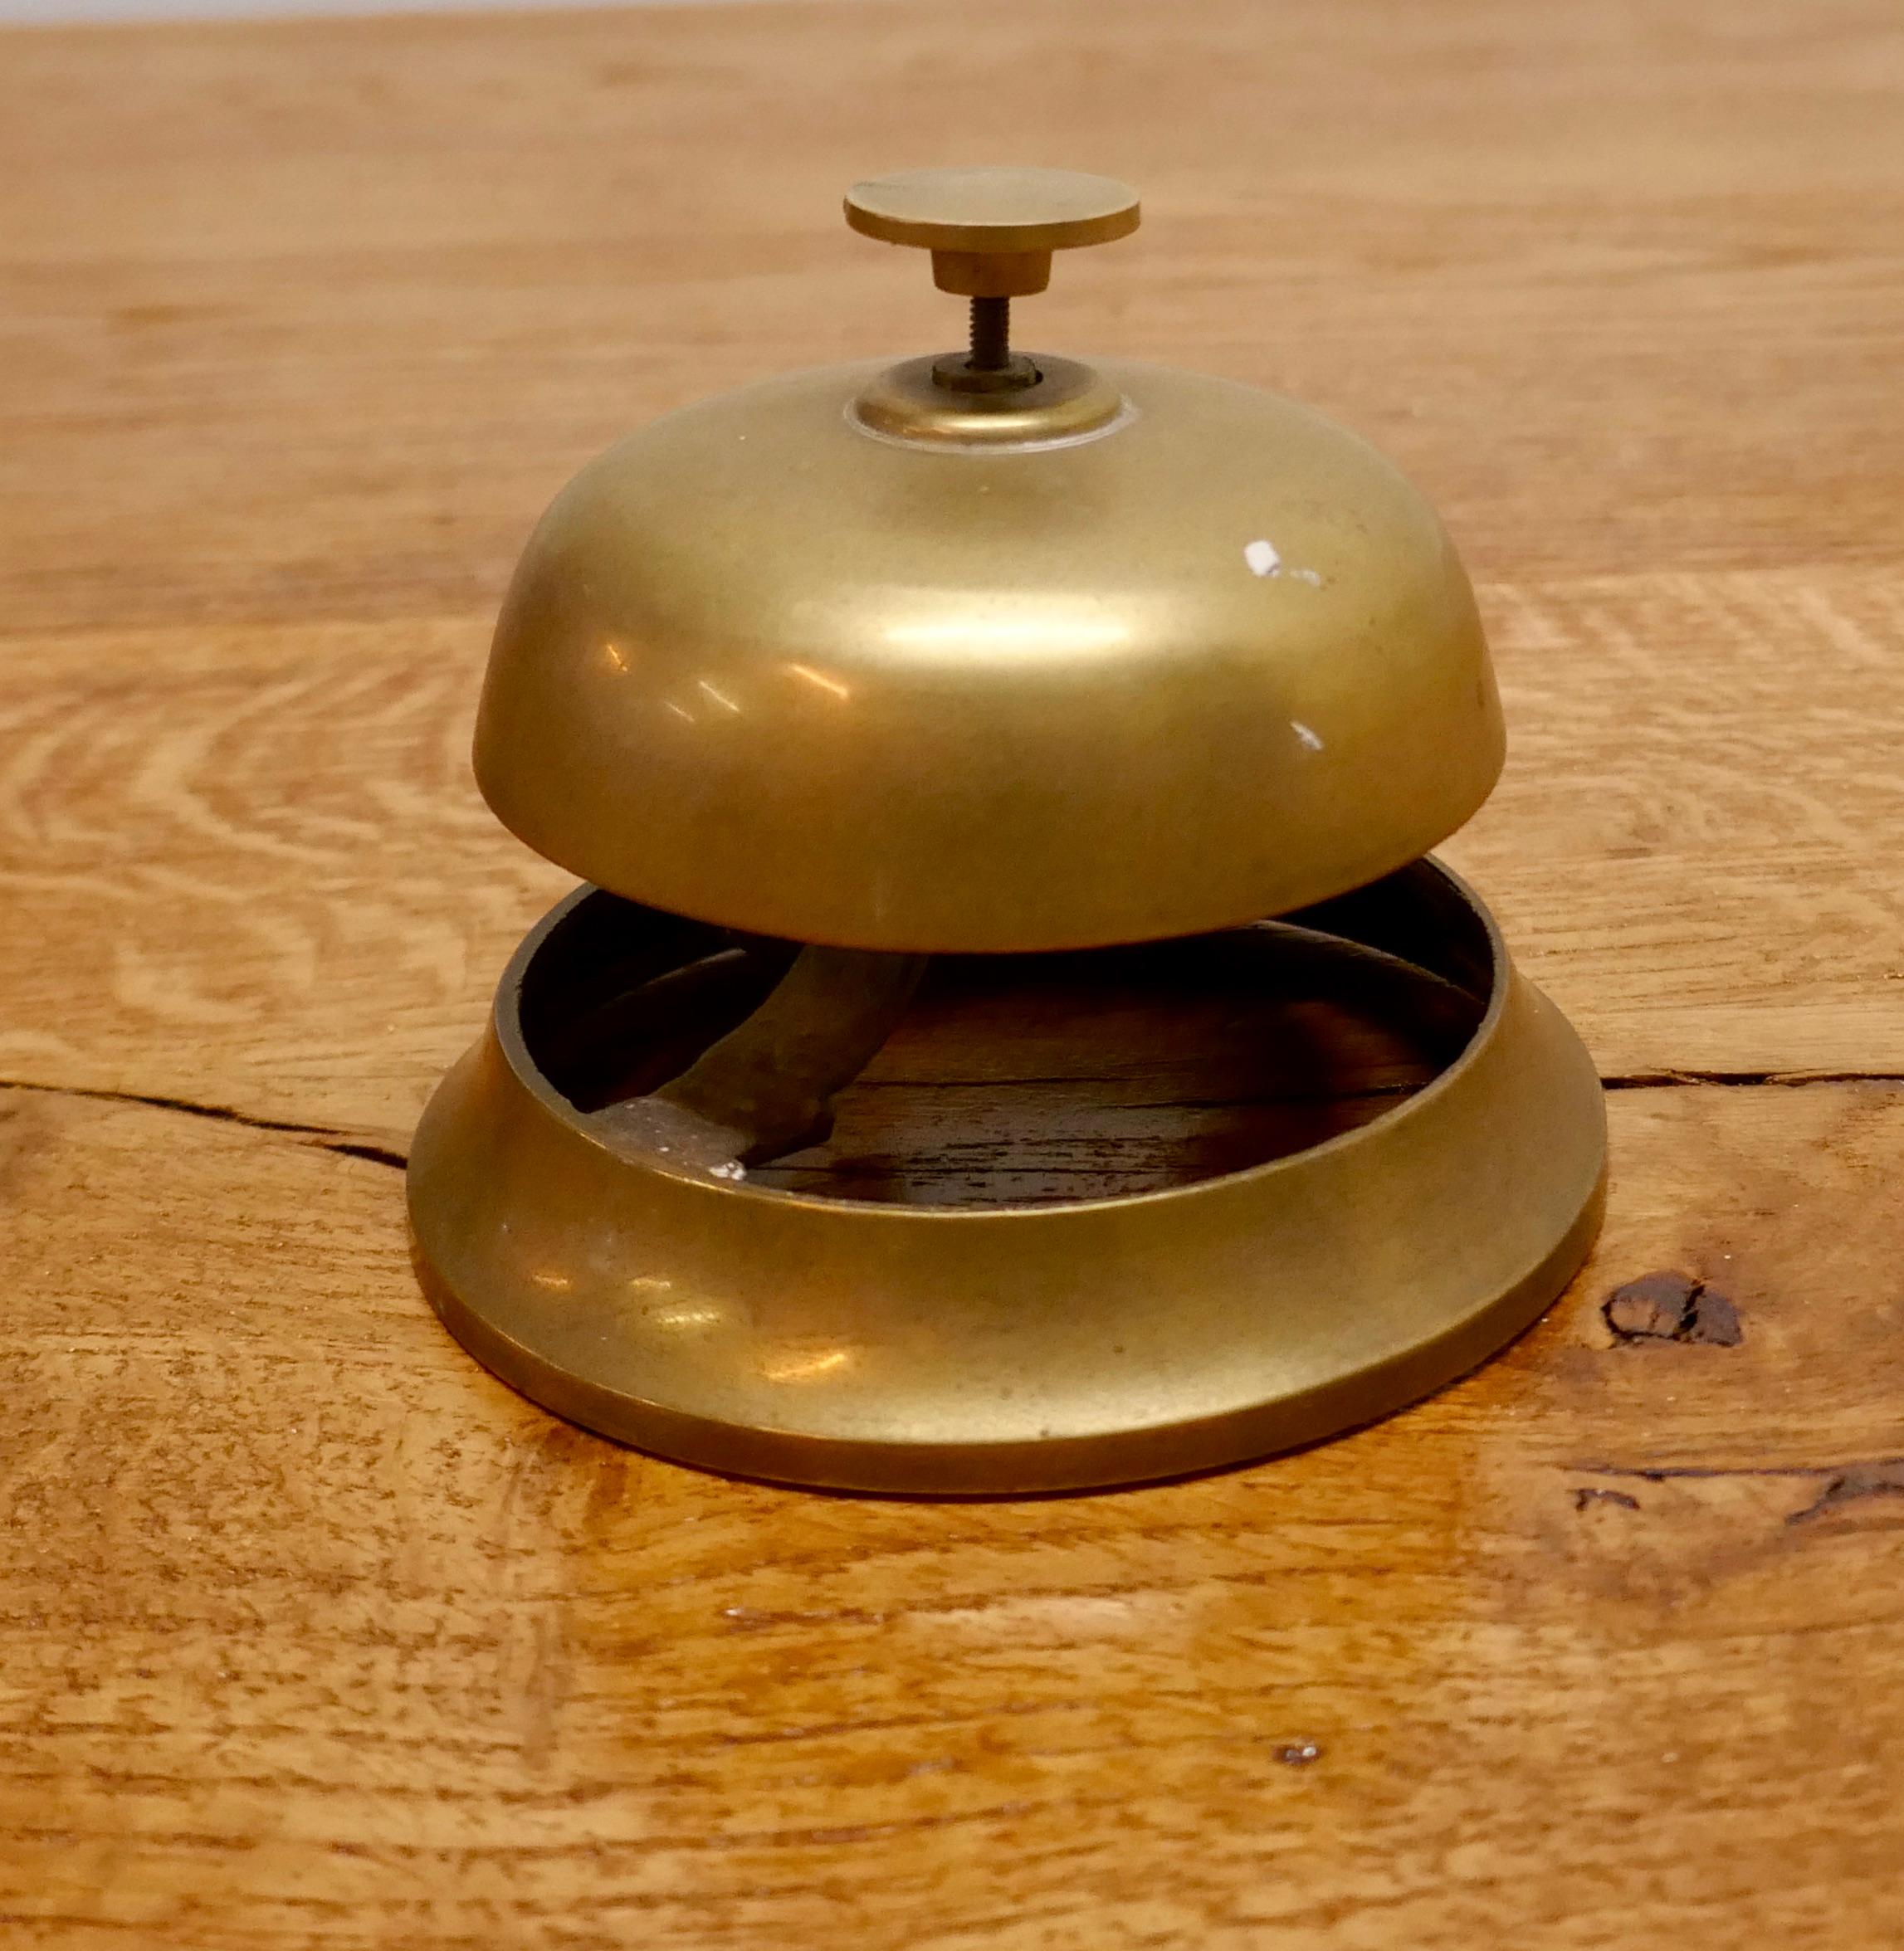 Victorian brass courtesy counter top bell, reception desk bell

Made in solid brass, in good ready to use with a demanding ding, the bell is 4” in diameter and 4” high 
NV315.
 